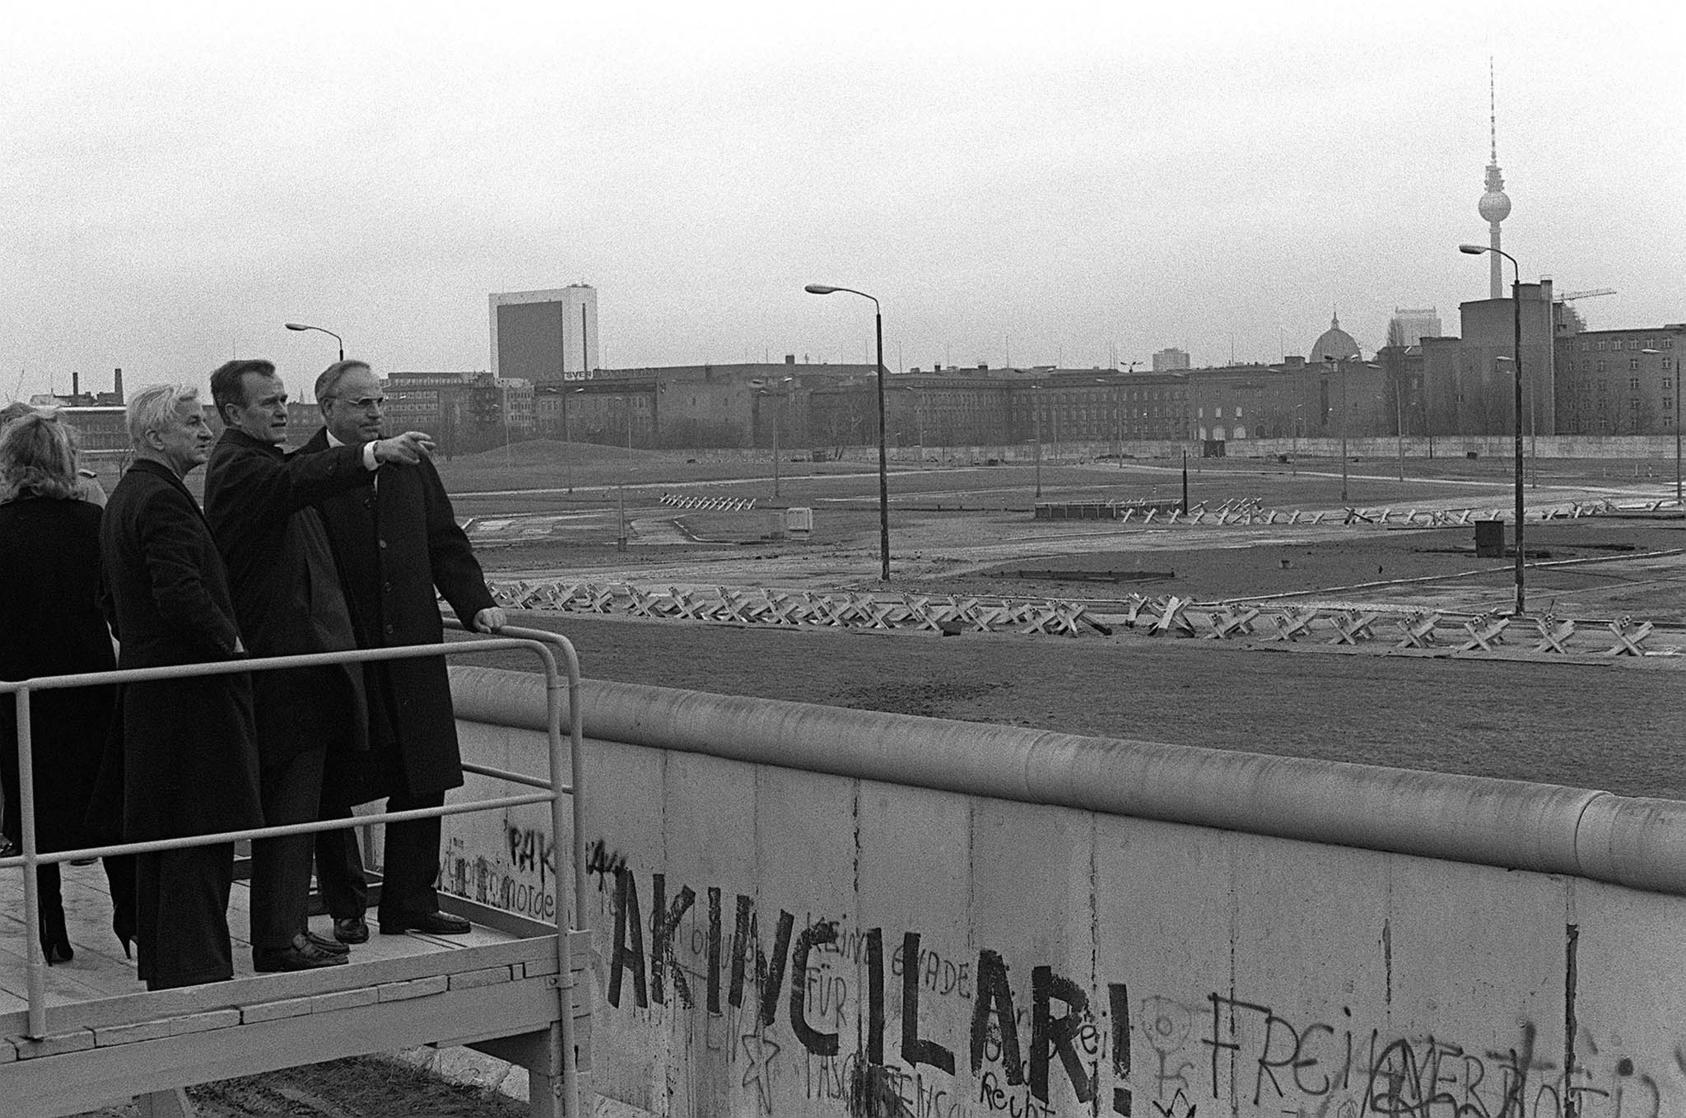 Vice President George H.W. Bush looks over the Berlin Wall into East Berlin,  escorted by West Berlin Mayor Richard von Weizacker and German Chancellor Helmut Kohl, February 1, 1983. (U.S. Department of Defense)